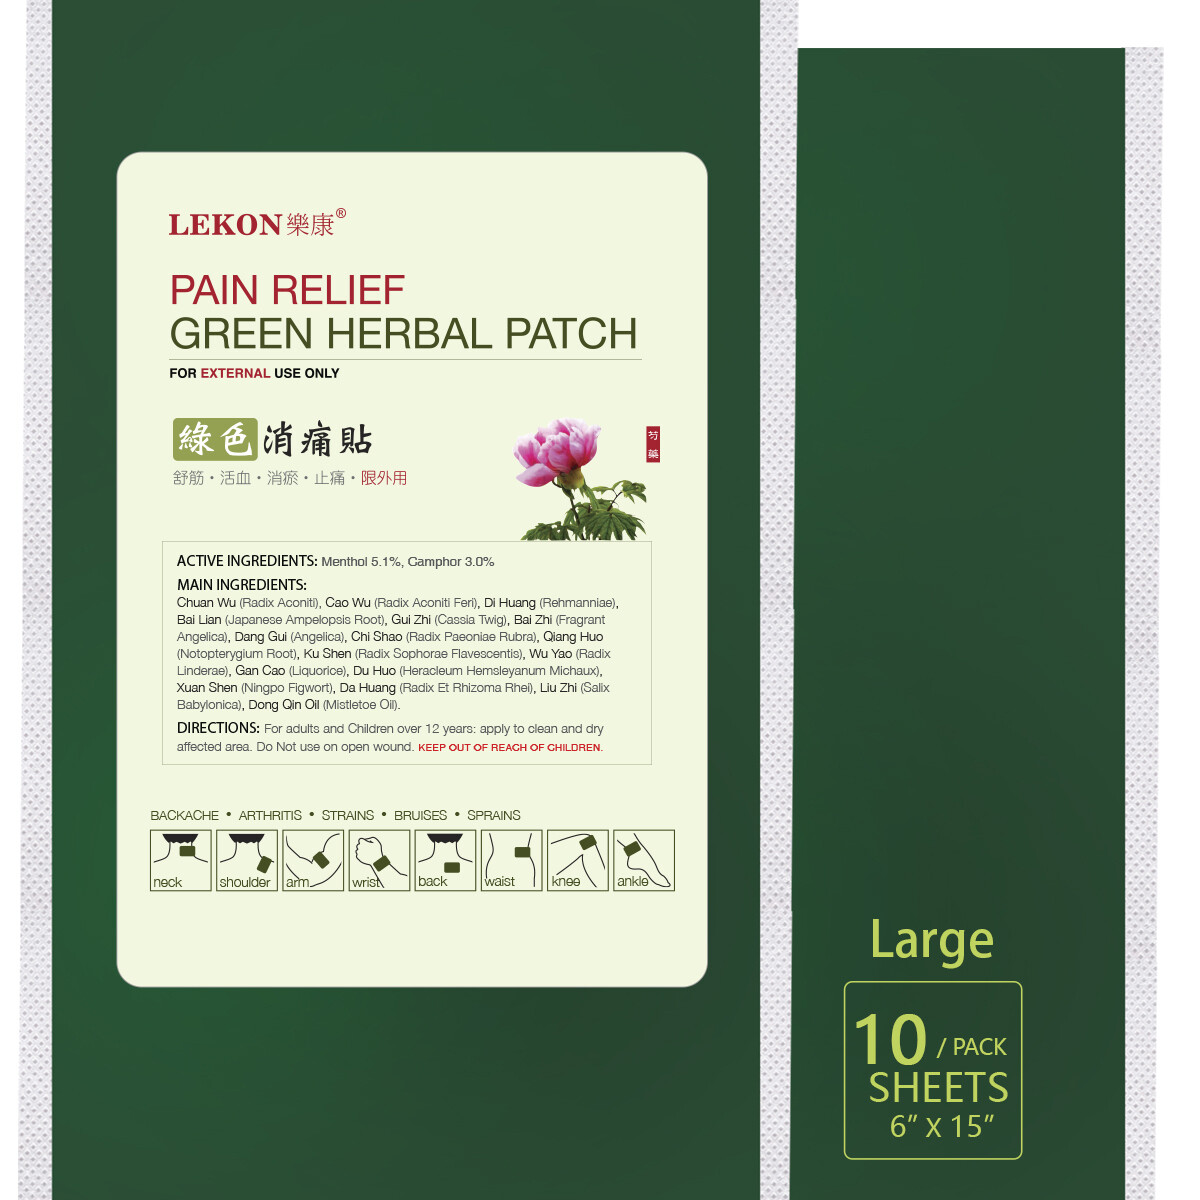 LEKON - Pain Relief Green Herbal Patch 10 Sheets Per Pack - LARGE (6